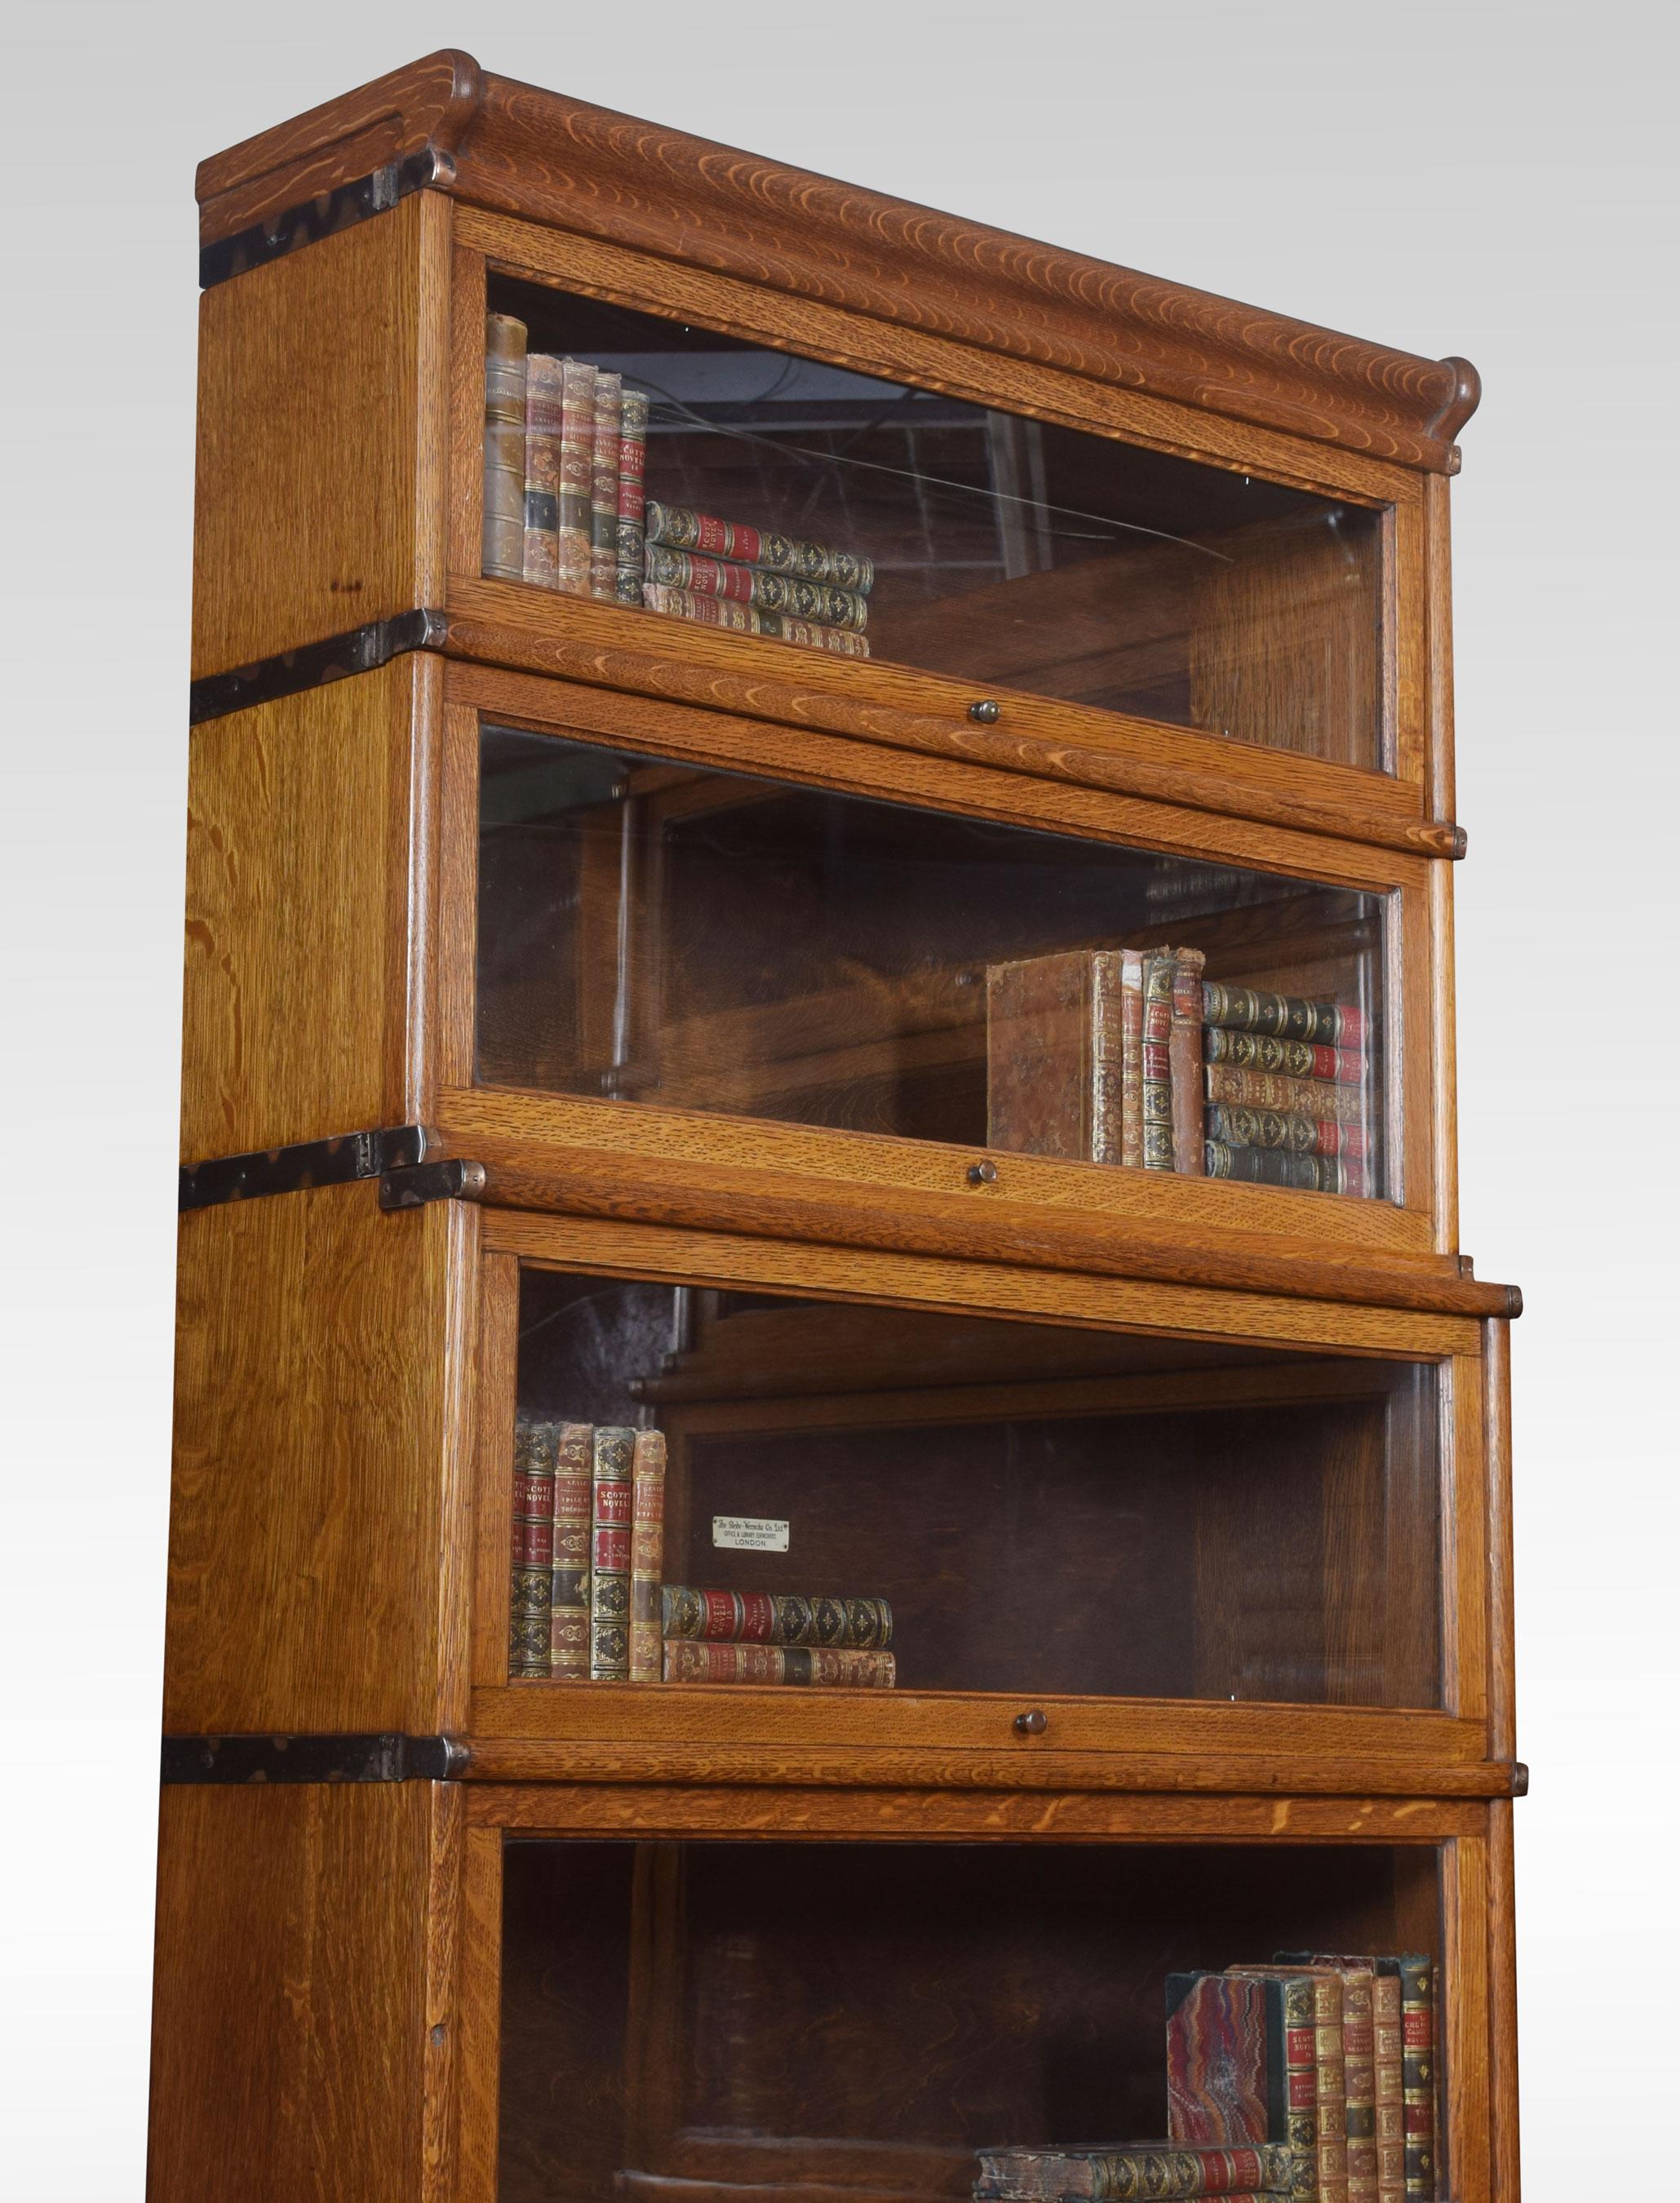 Pair of oak globe Wernicke six-section bookcases, the moulded top above six graduated sections all having glazed doors, raised up on plinth base fitted with a drawer.
Dimensions:
Height 88 inches
Width 34 inches
Depth 15 inches.